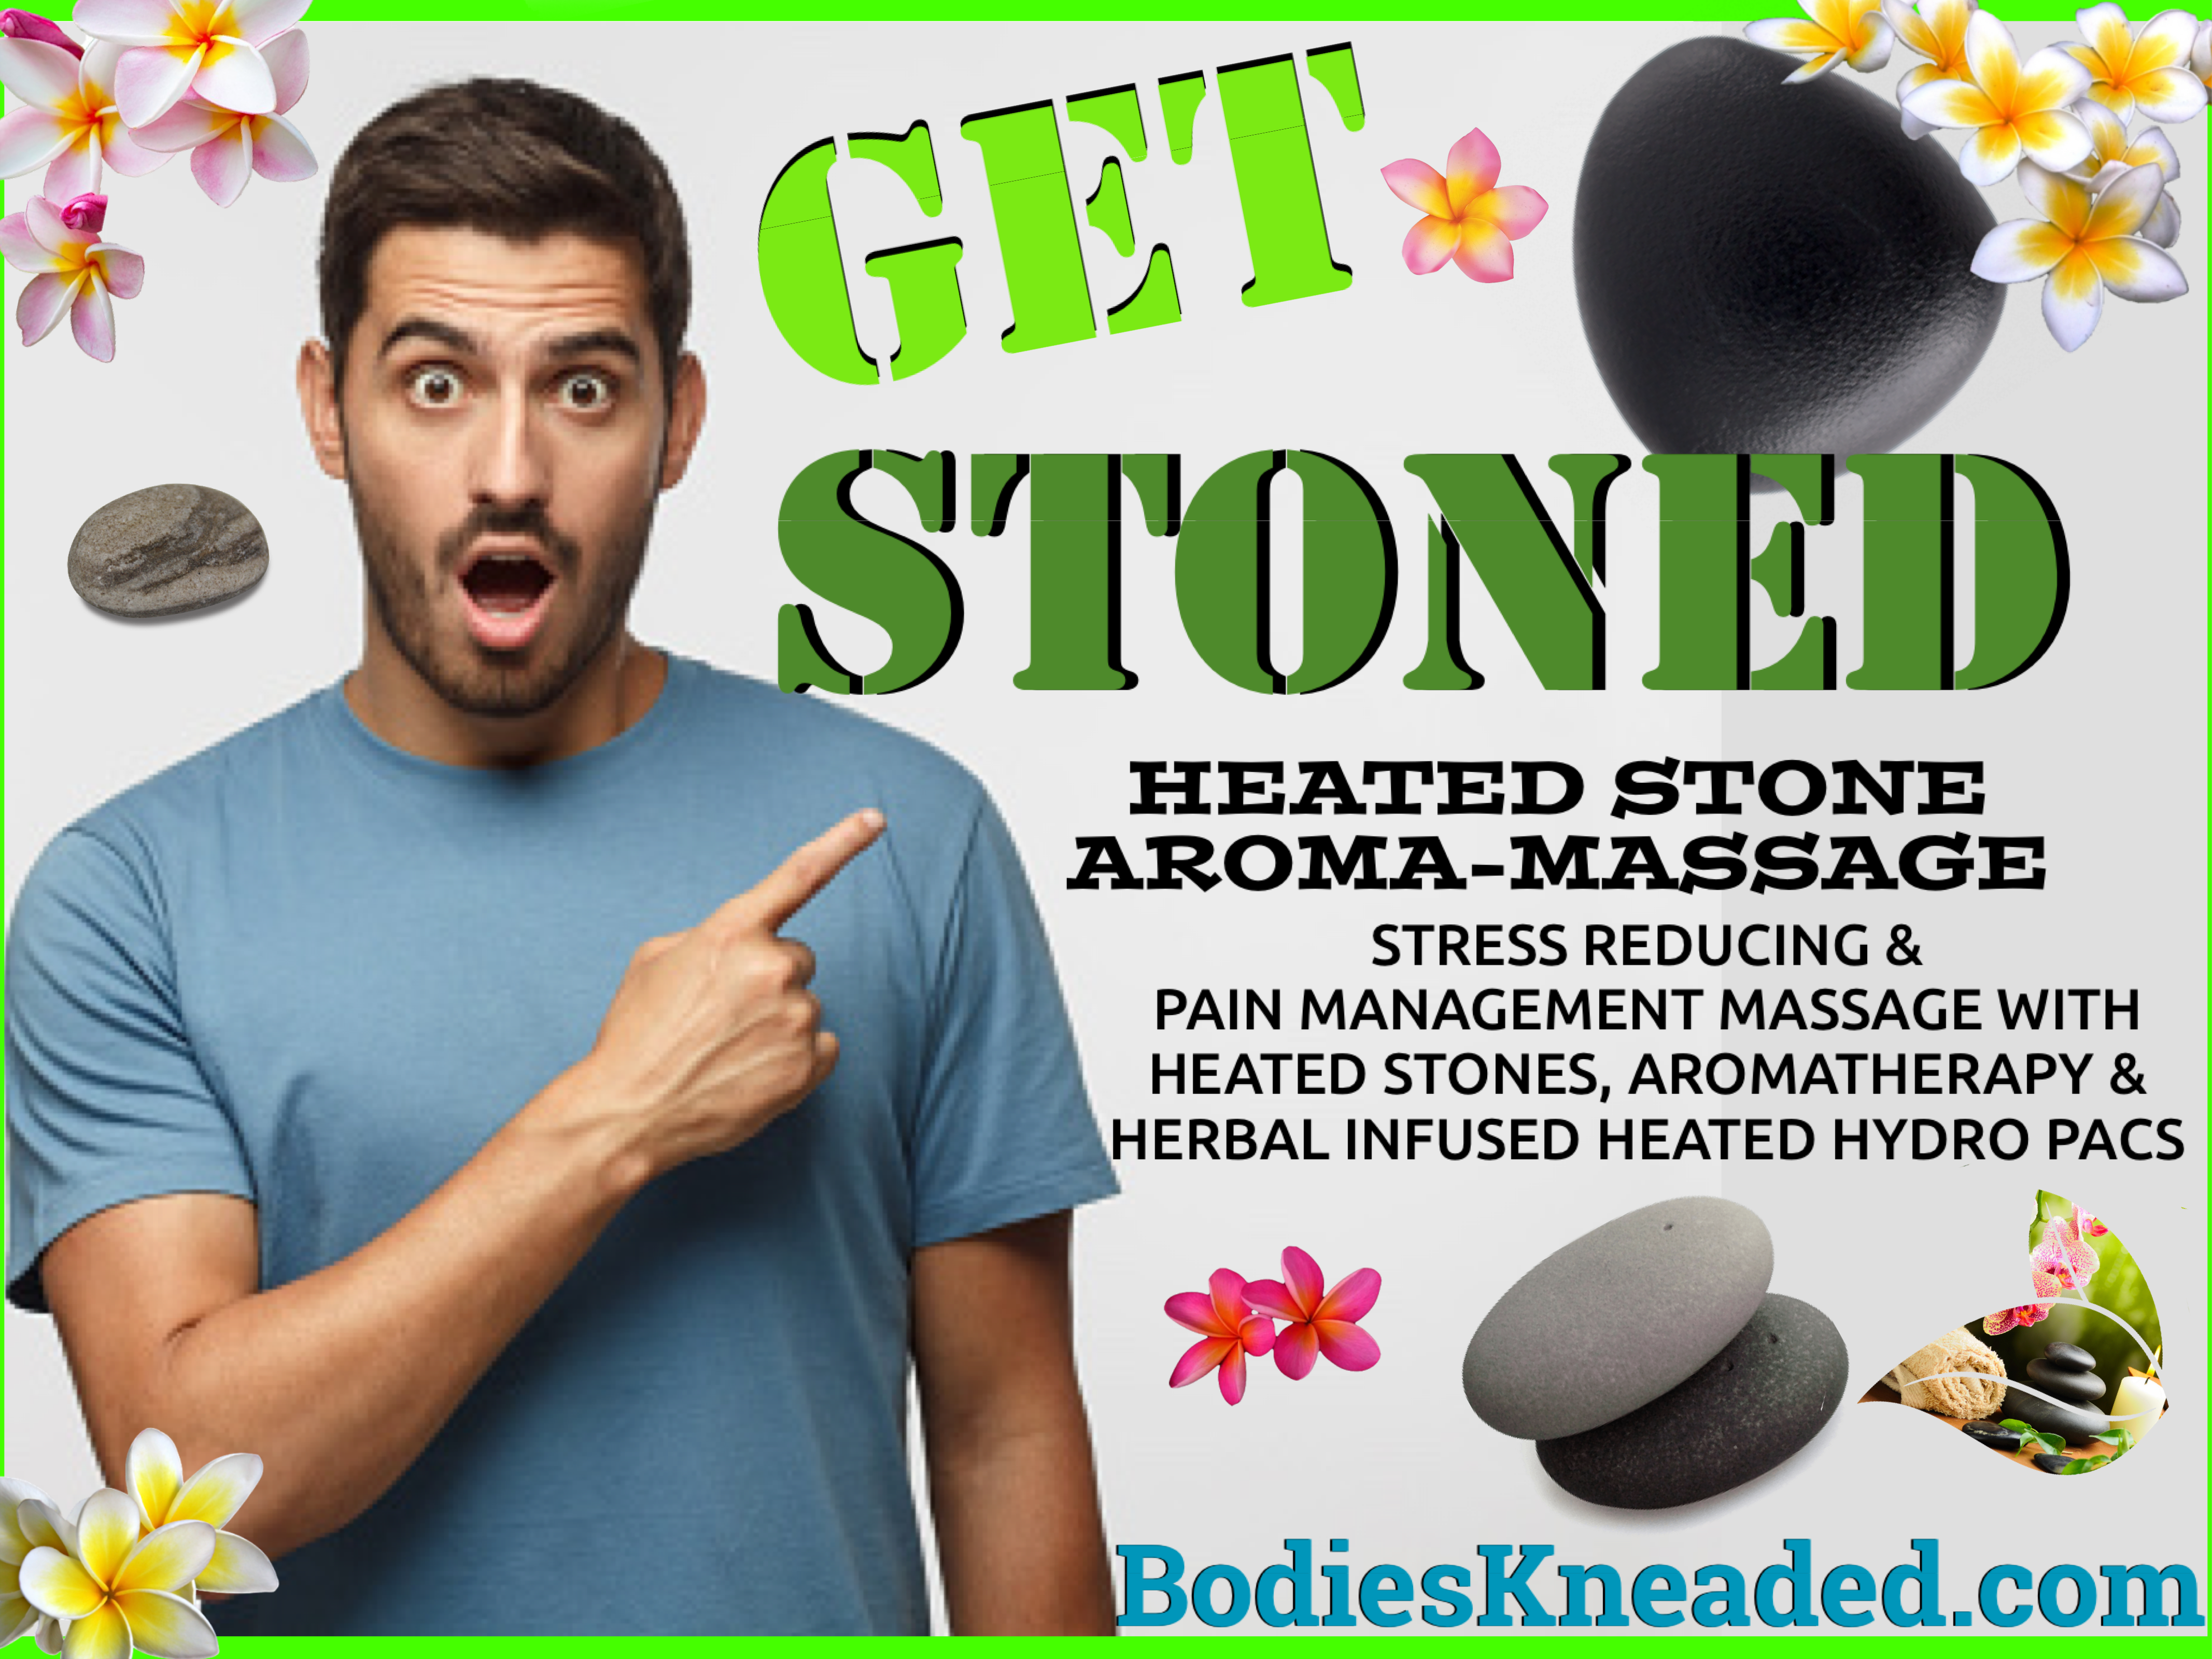 "Get Stoned"